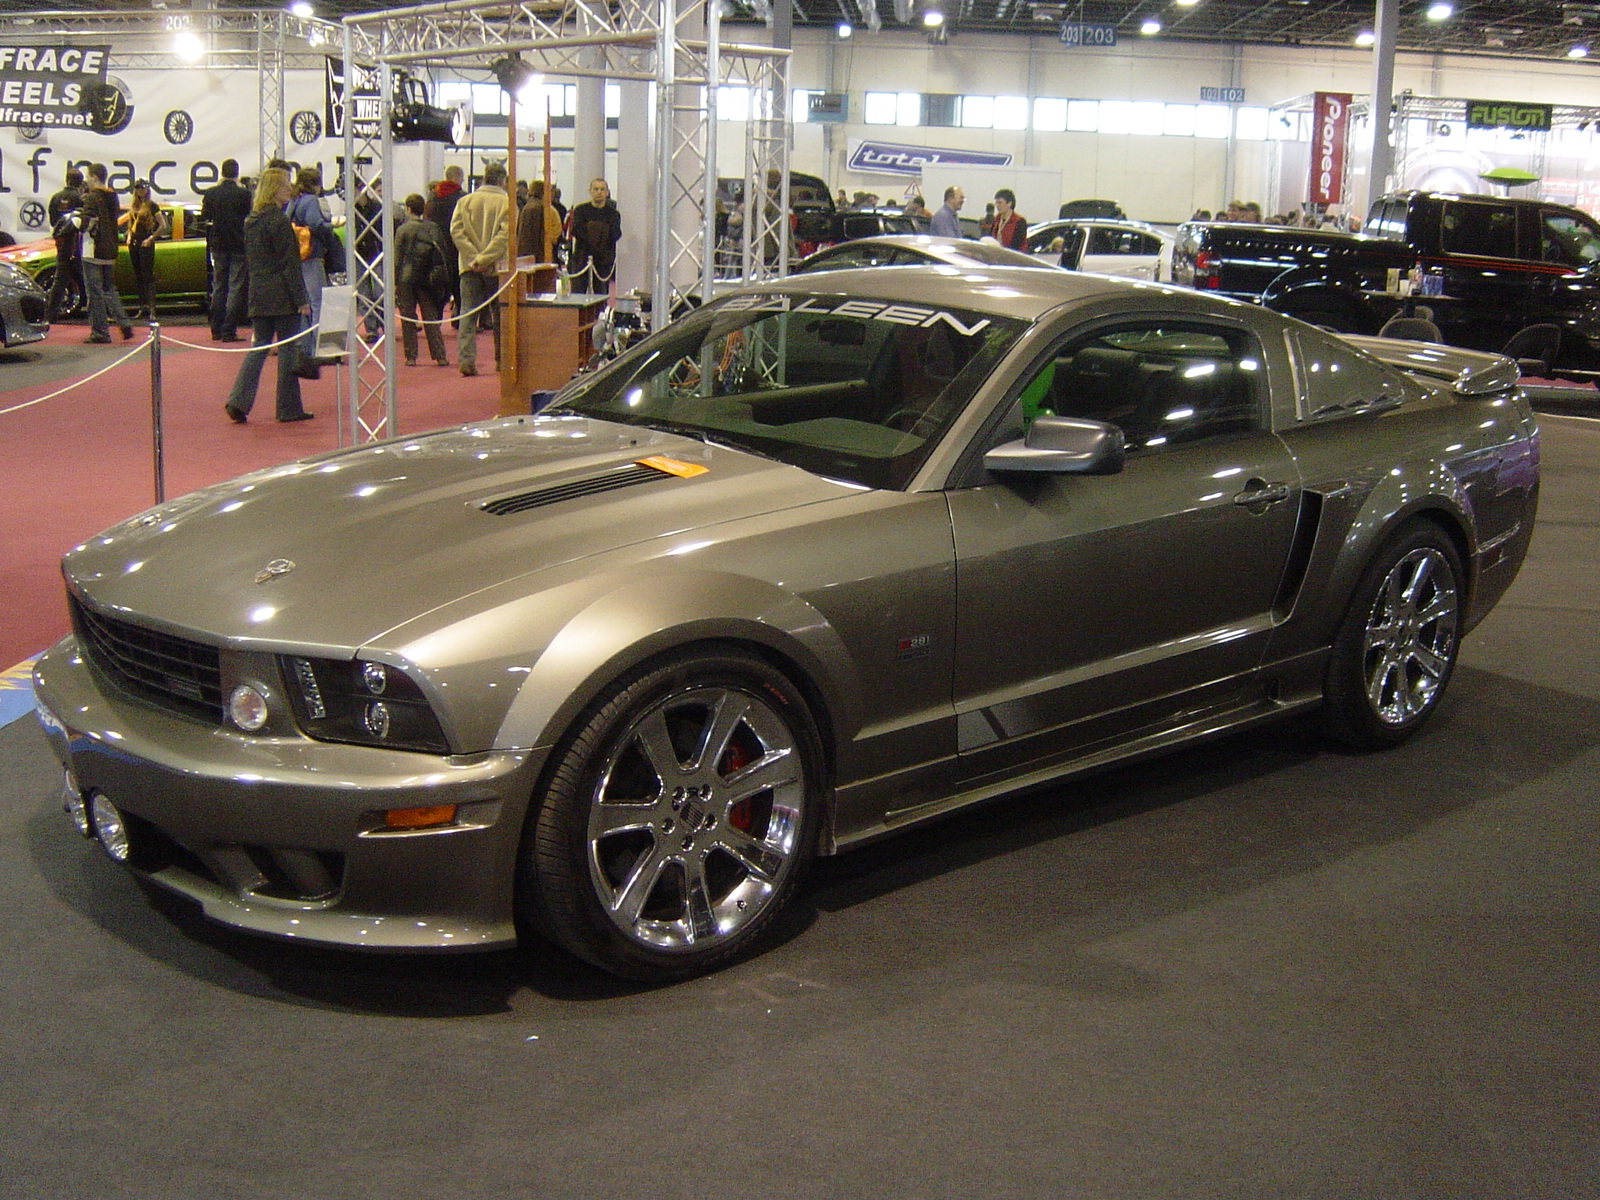 File:Tuning Show 2008 - 021 - Saleen Mustang (front) - 003.jpg ...